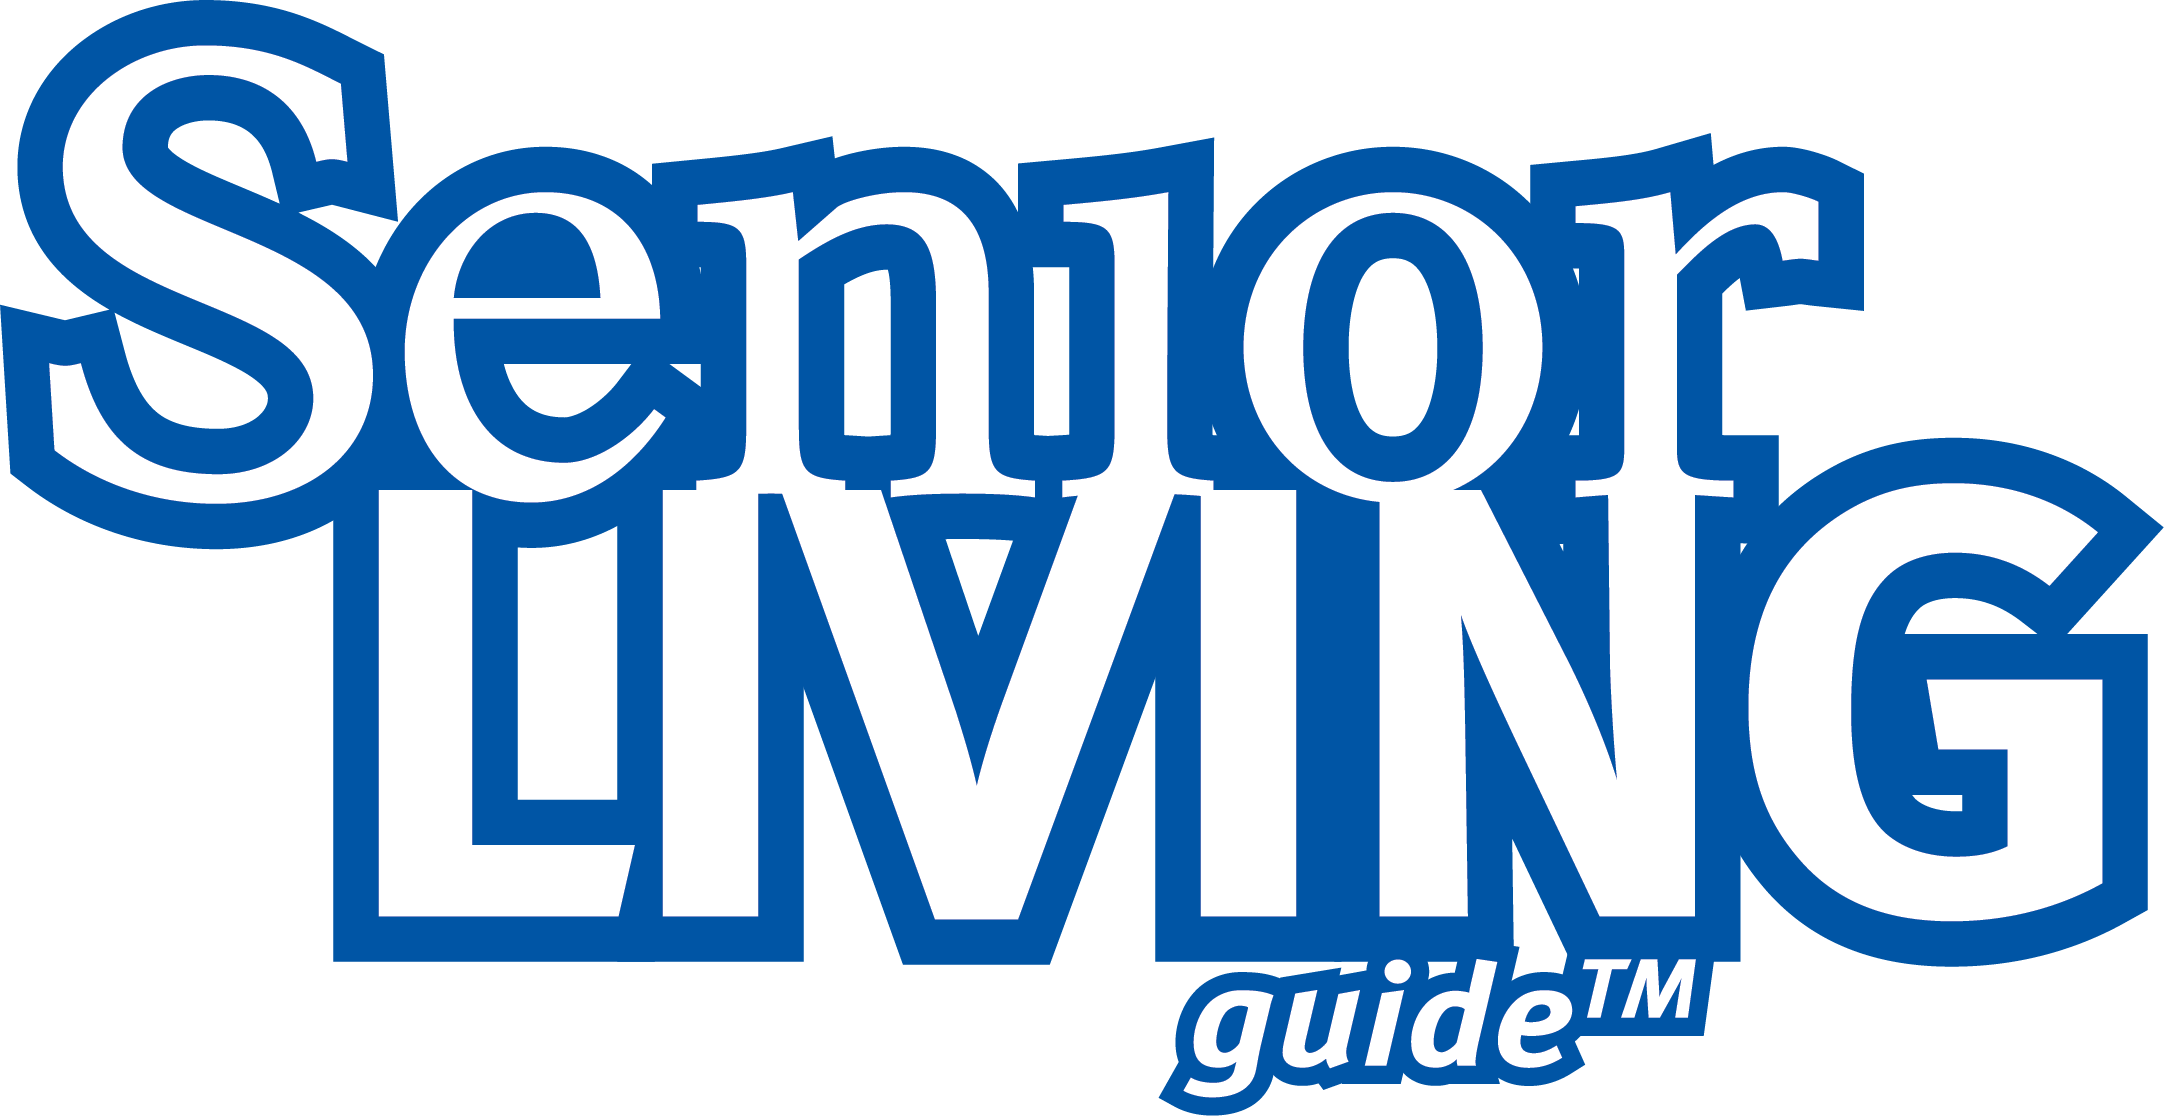 3c. Senior Living Guide (Supporting)